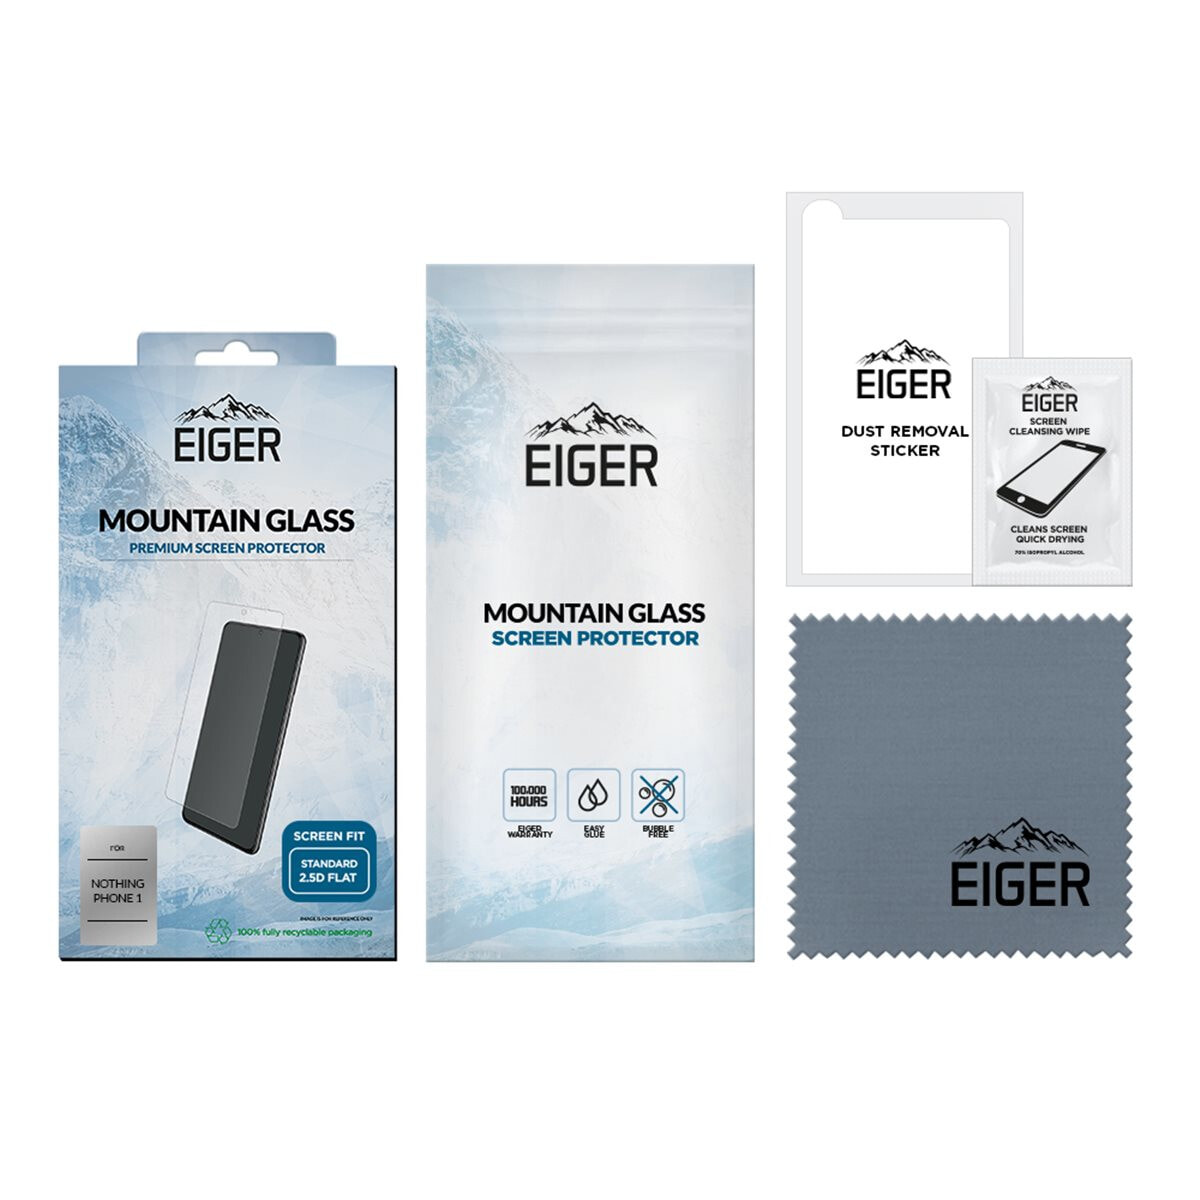 Eiger EGSP00861 - Nothing - Phone (1) - Transparent - 1 pc(s)